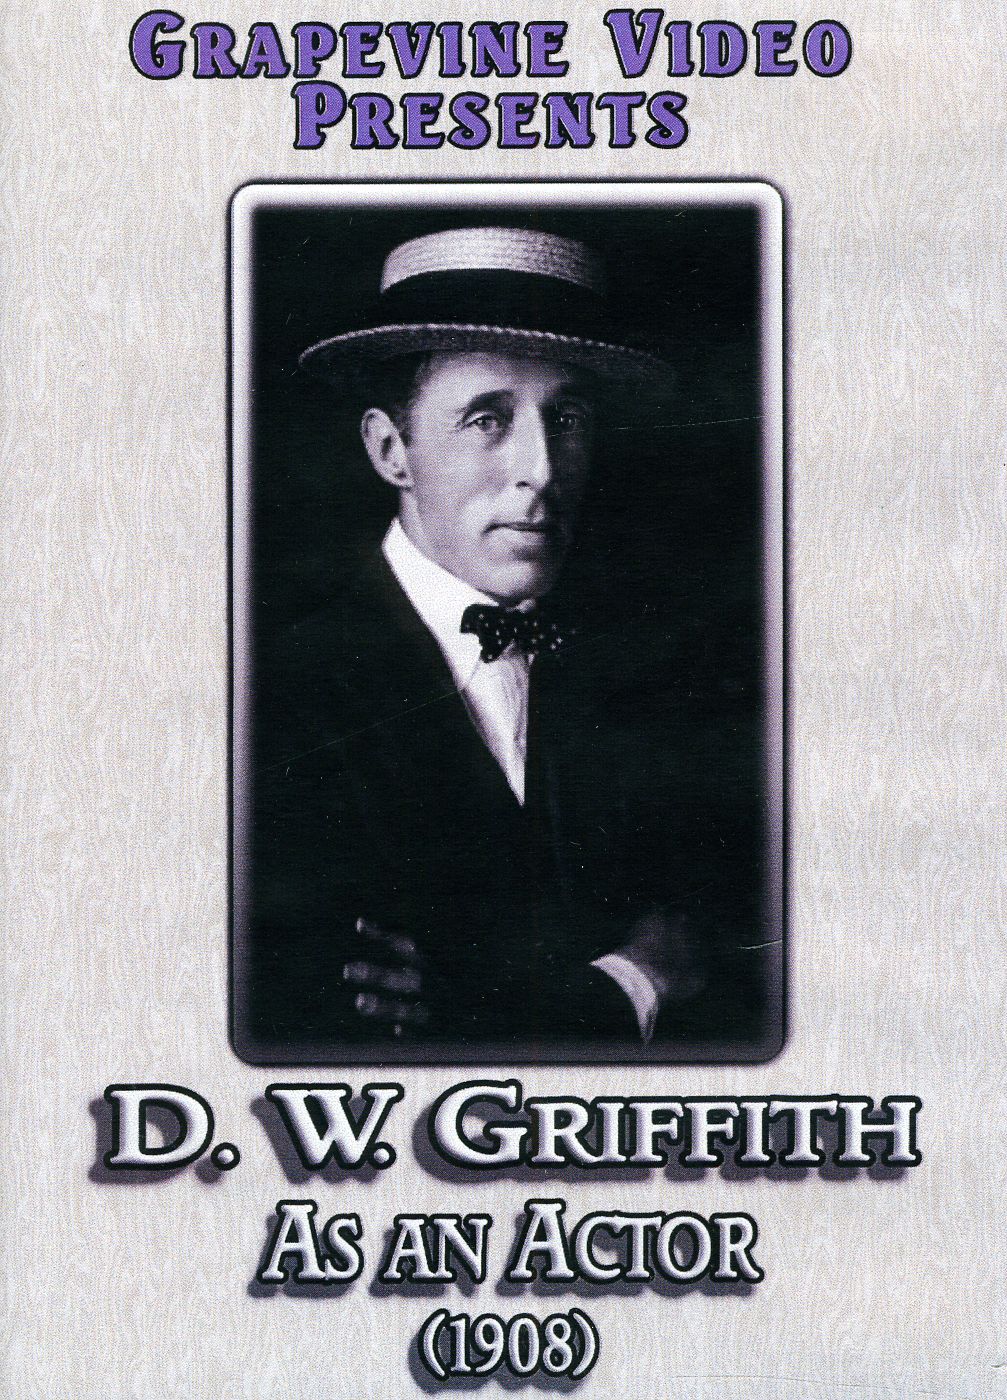 D. W. GRIFFITH: ACTOR (1908) (SILENT) / (B&W)